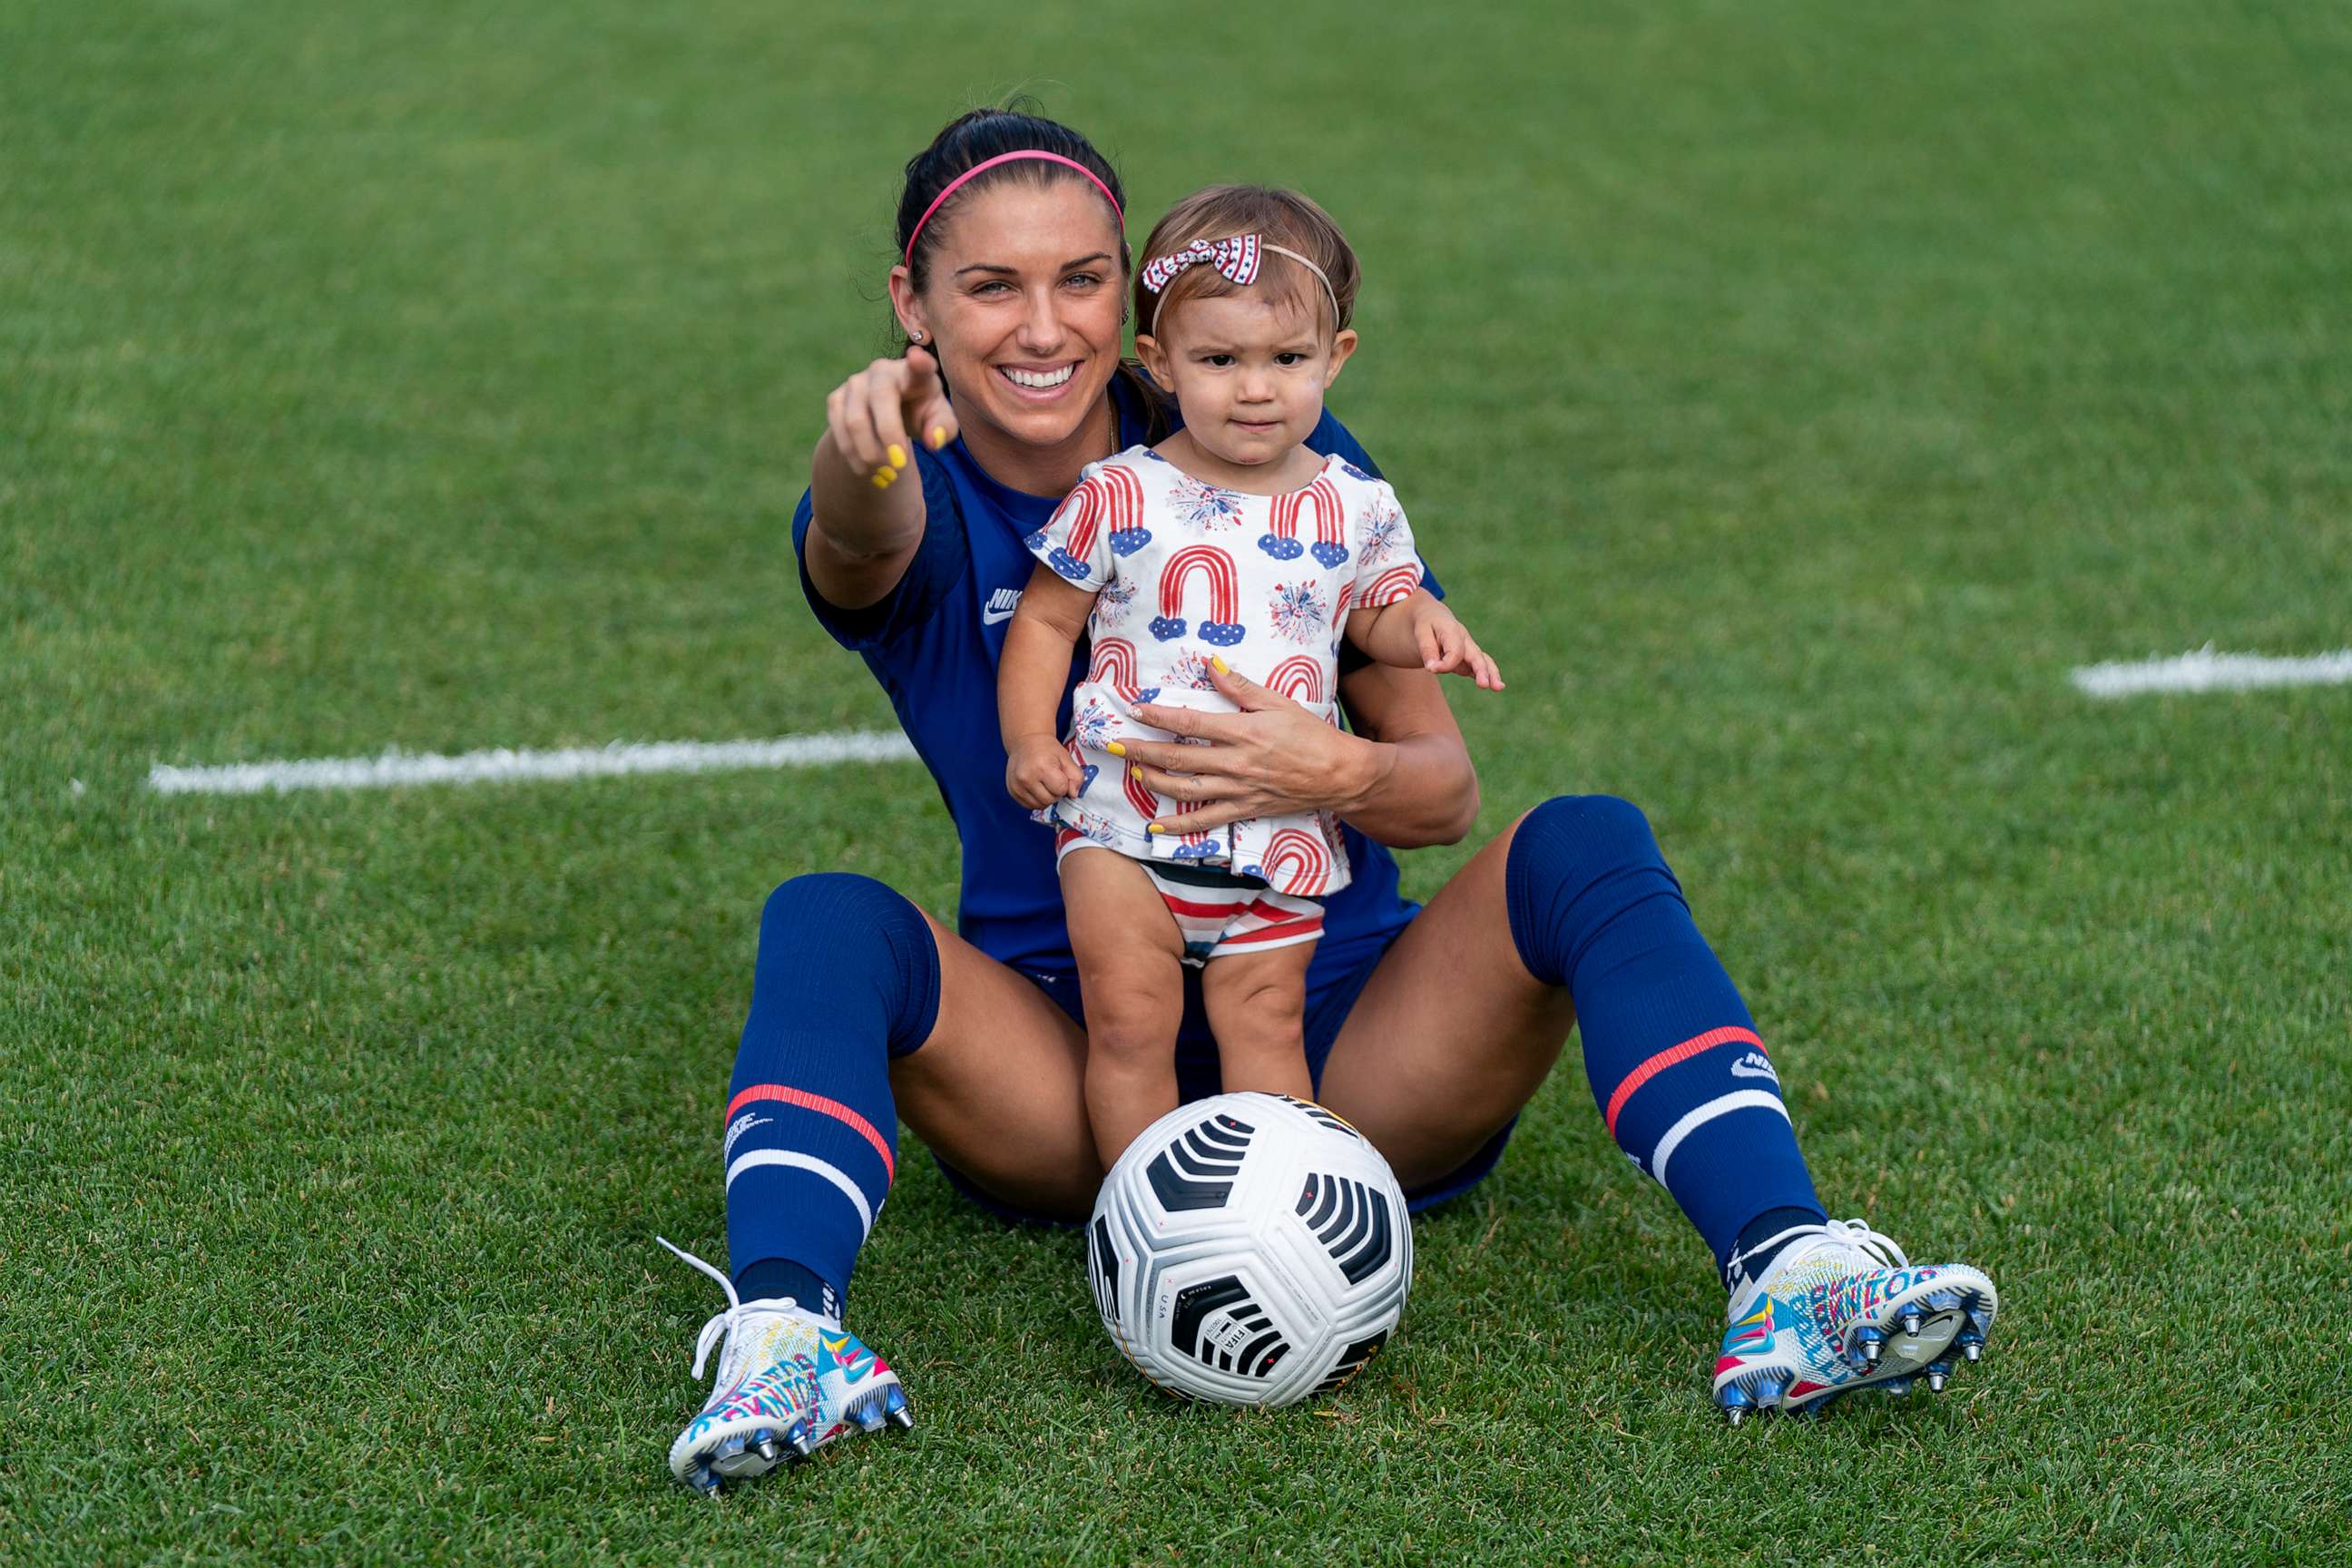 PHOTO: In this July 4, 2021 file photo Alex Morgan poses with her daughter, Charlie Carrasco at the practice fields in Hartford, Conn.